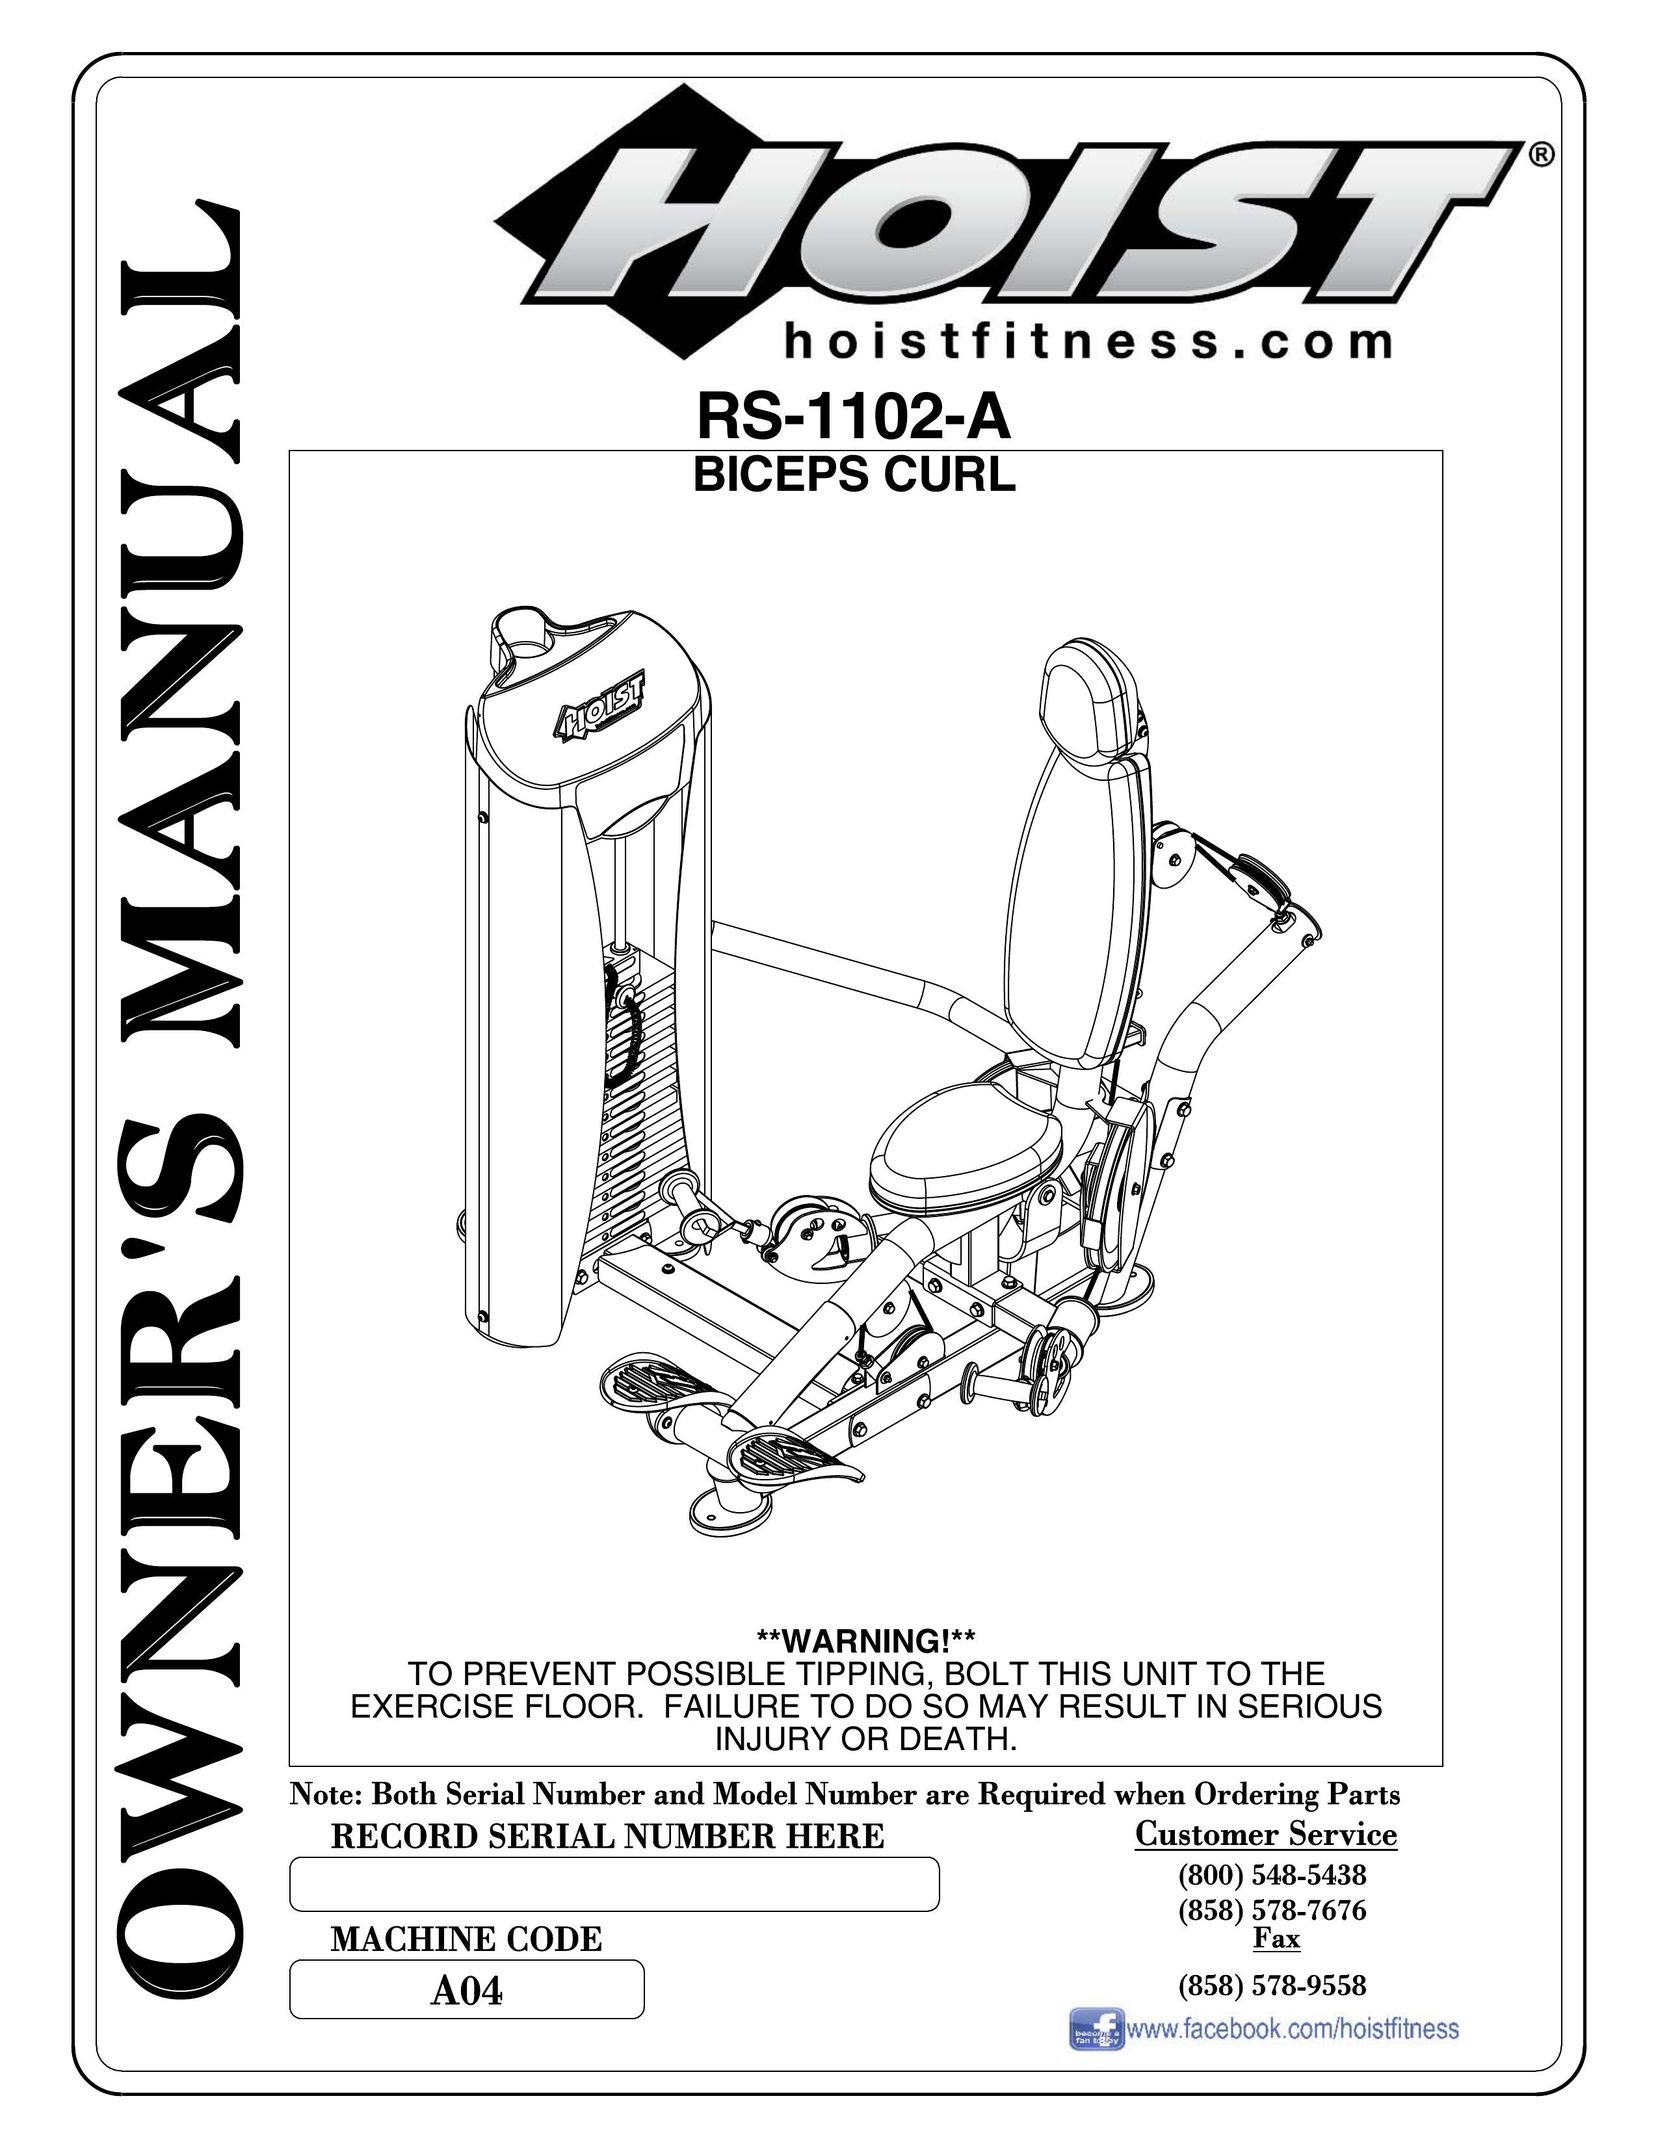 Hoist Fitness RS-1102A Baby Gym User Manual